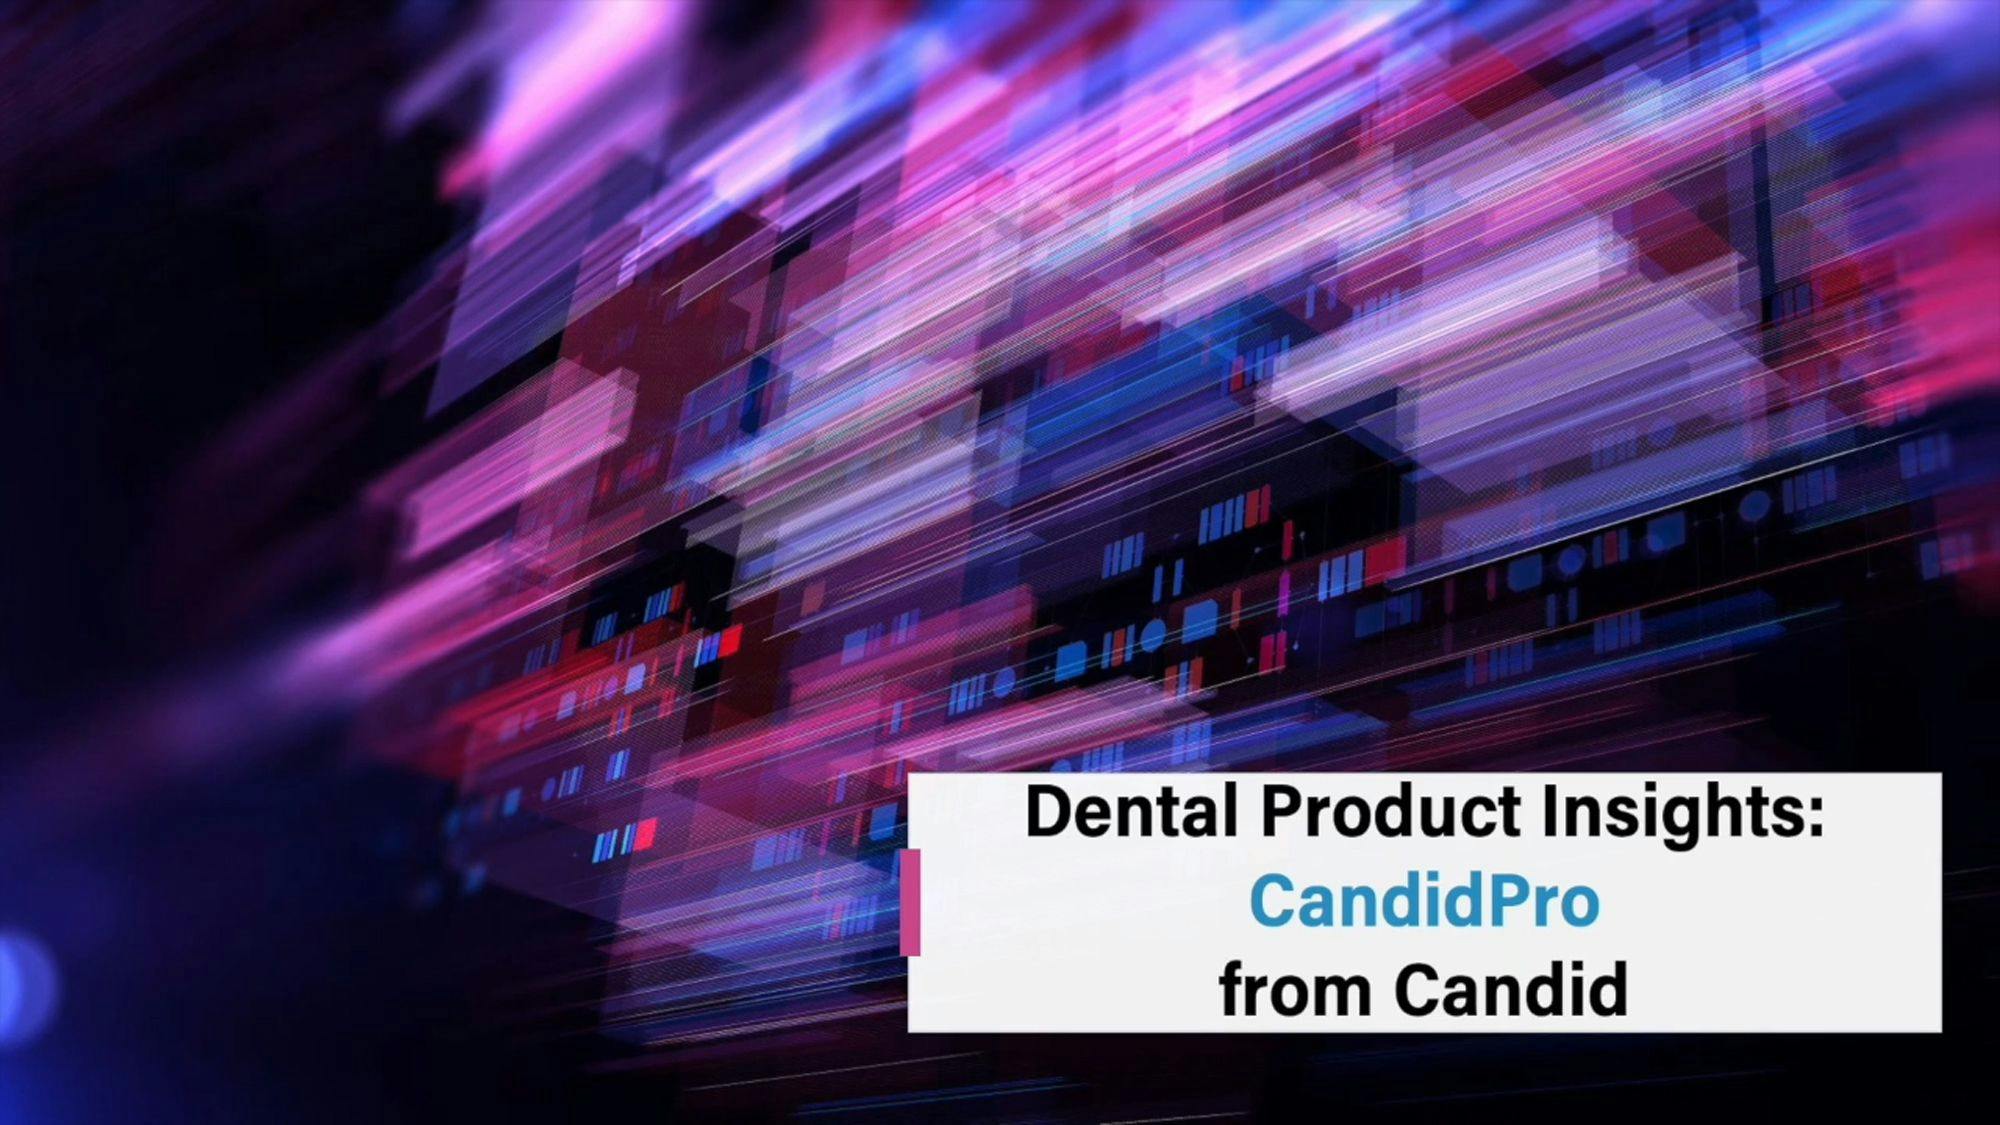 Dental Product Insights: CandidPro from Candid